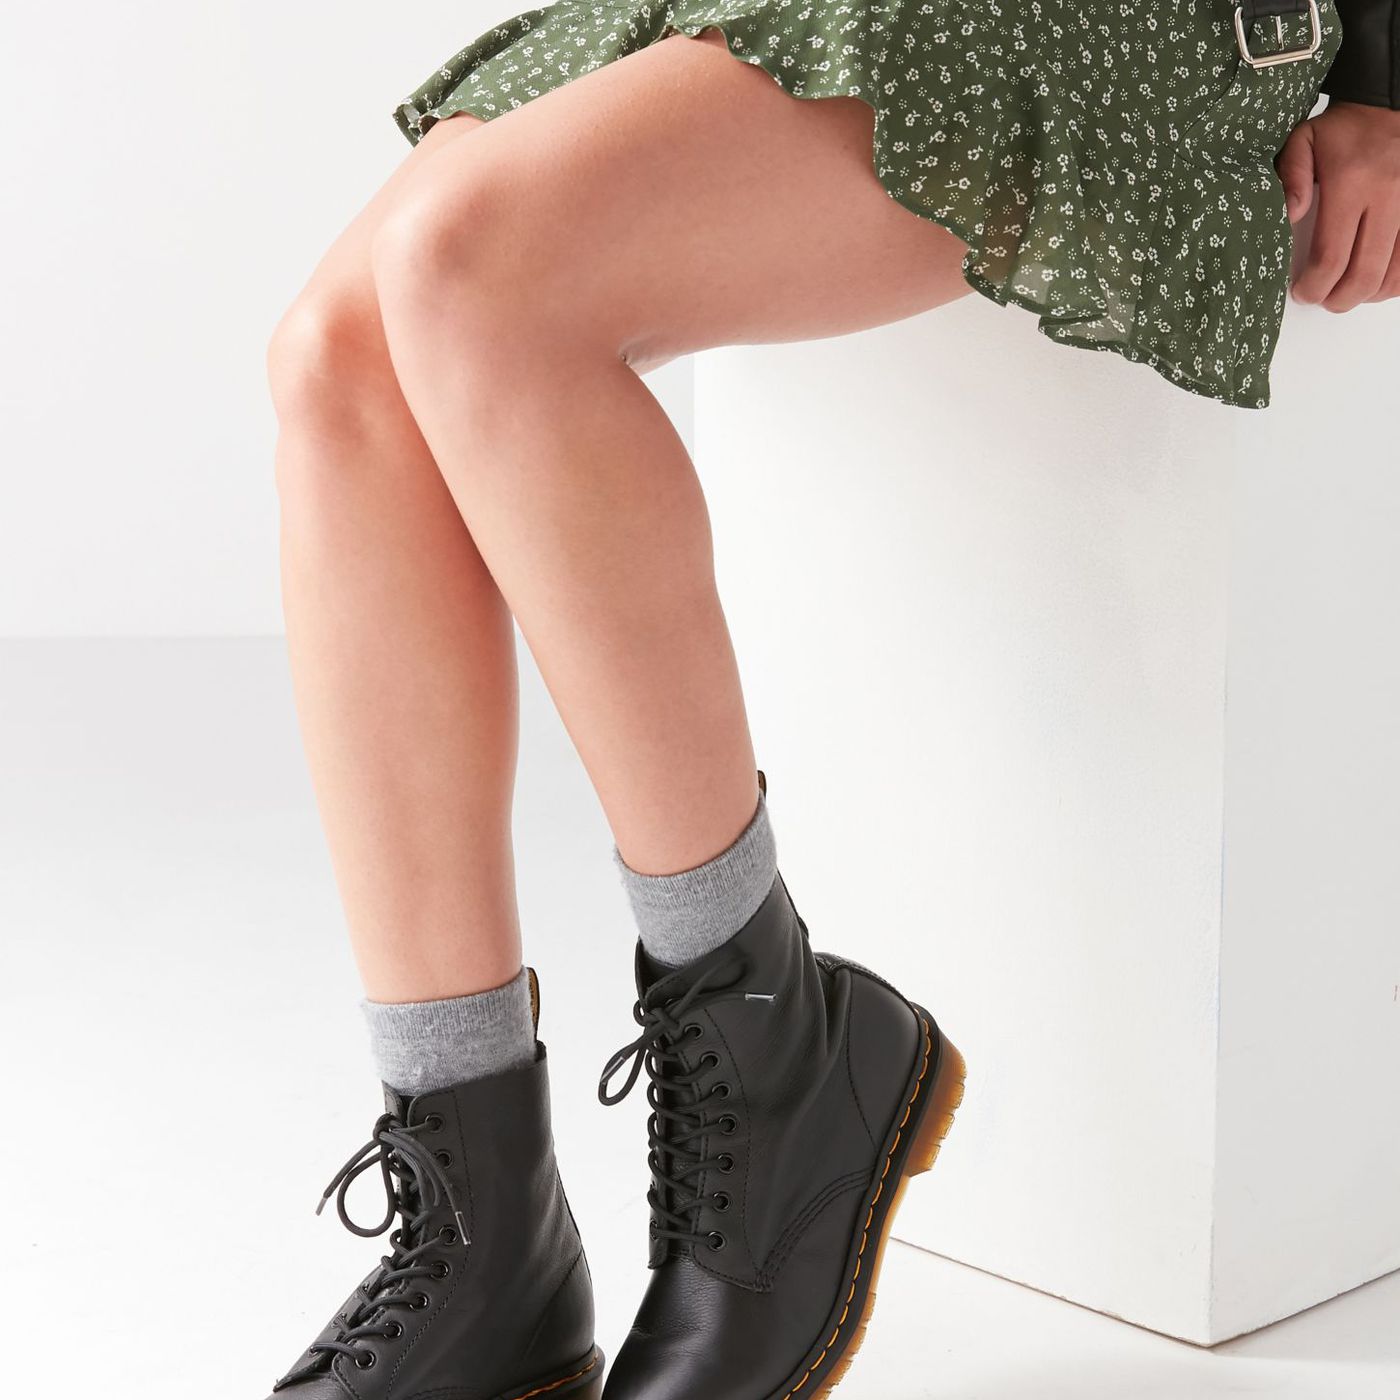 Opnemen fout Interpersoonlijk If You're Going to Buy Dr. Martens, Buy This Pair - Racked